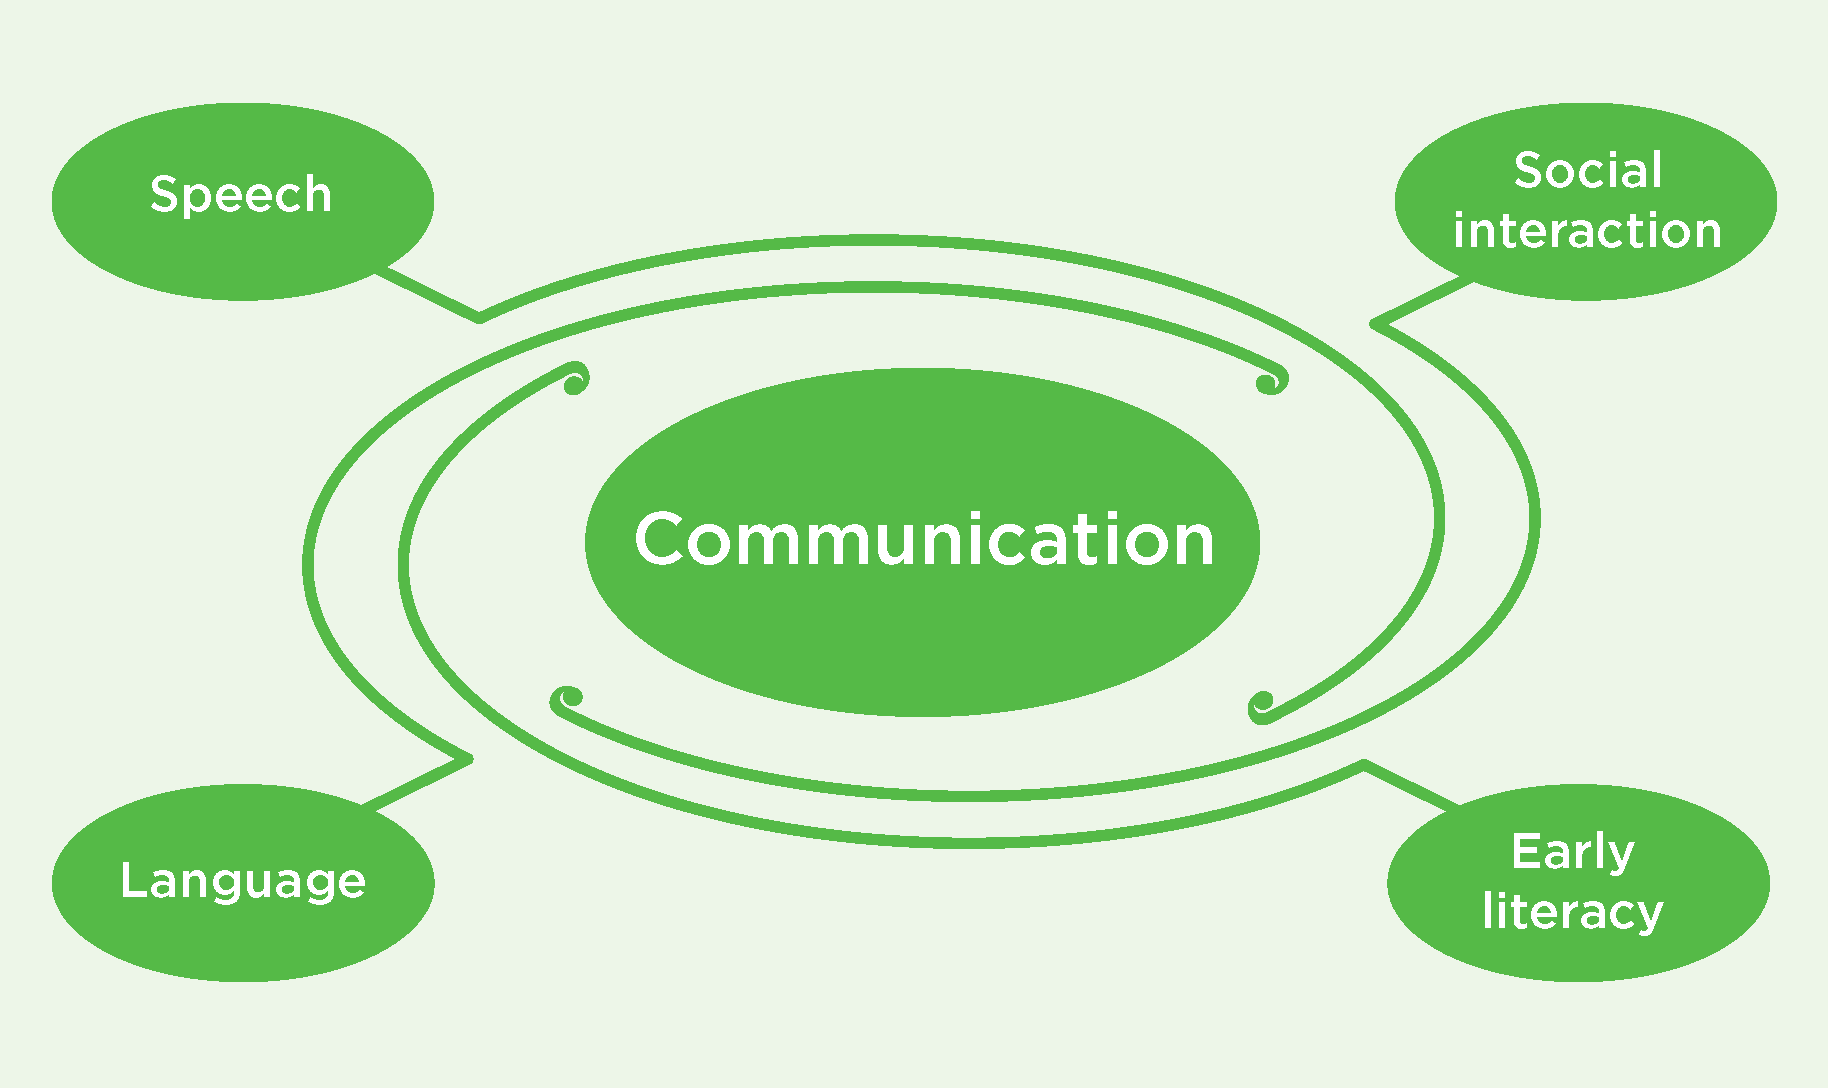 a circular diagram depicting the five parts of communication: Speech, Social Interaction, Early Literacy, and Language